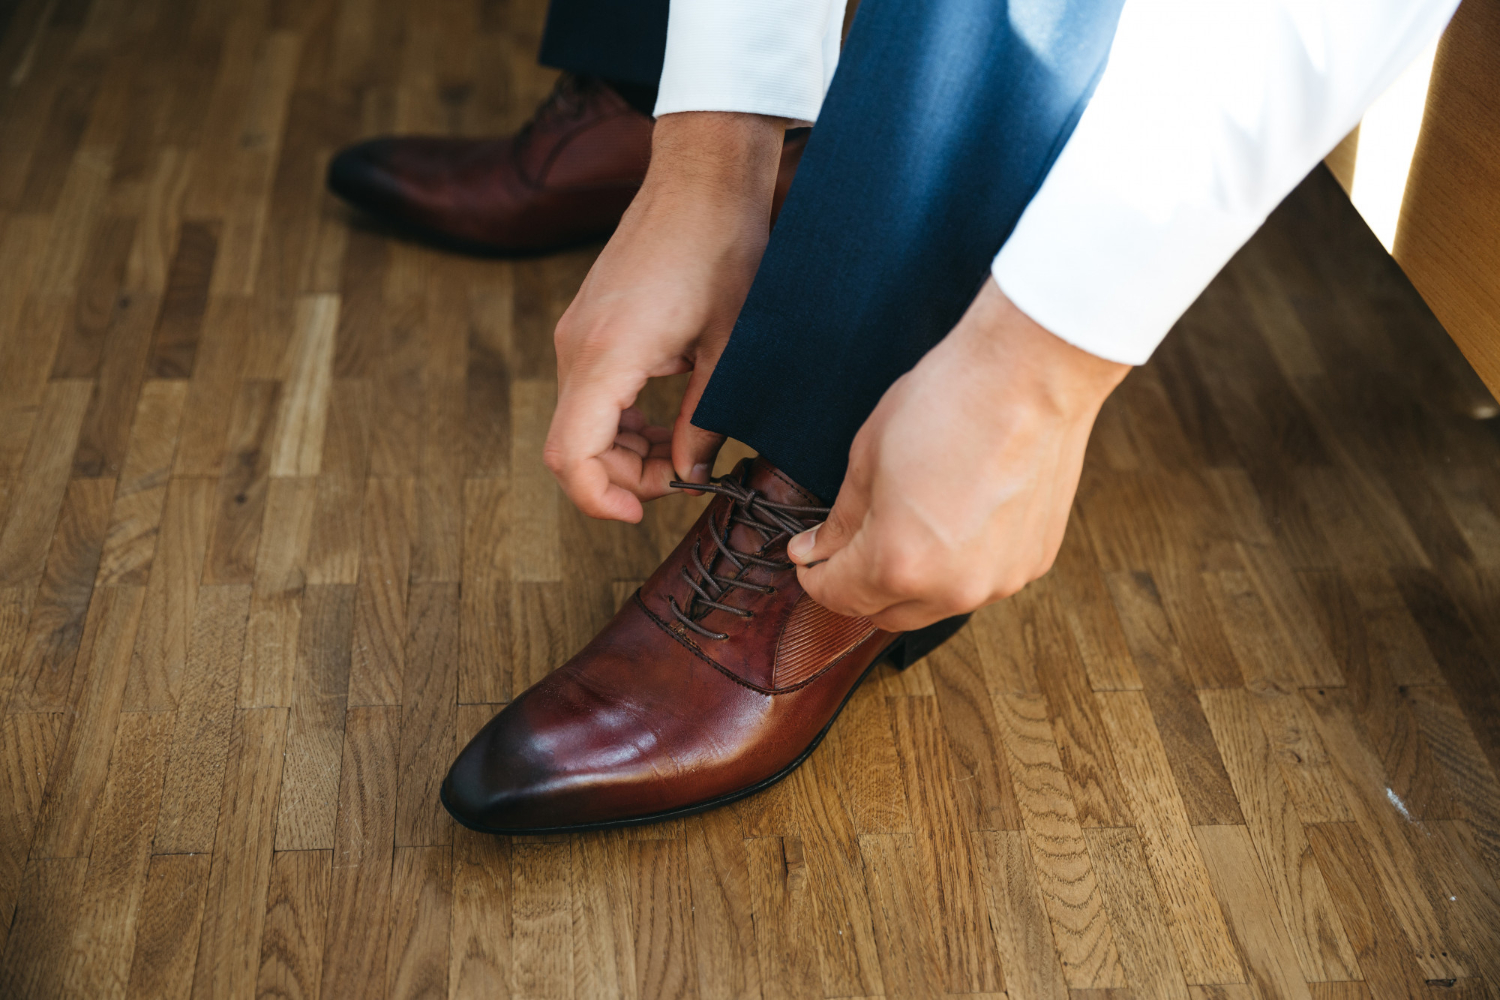 Color coordination and style of your Oxford shoes for the occasion